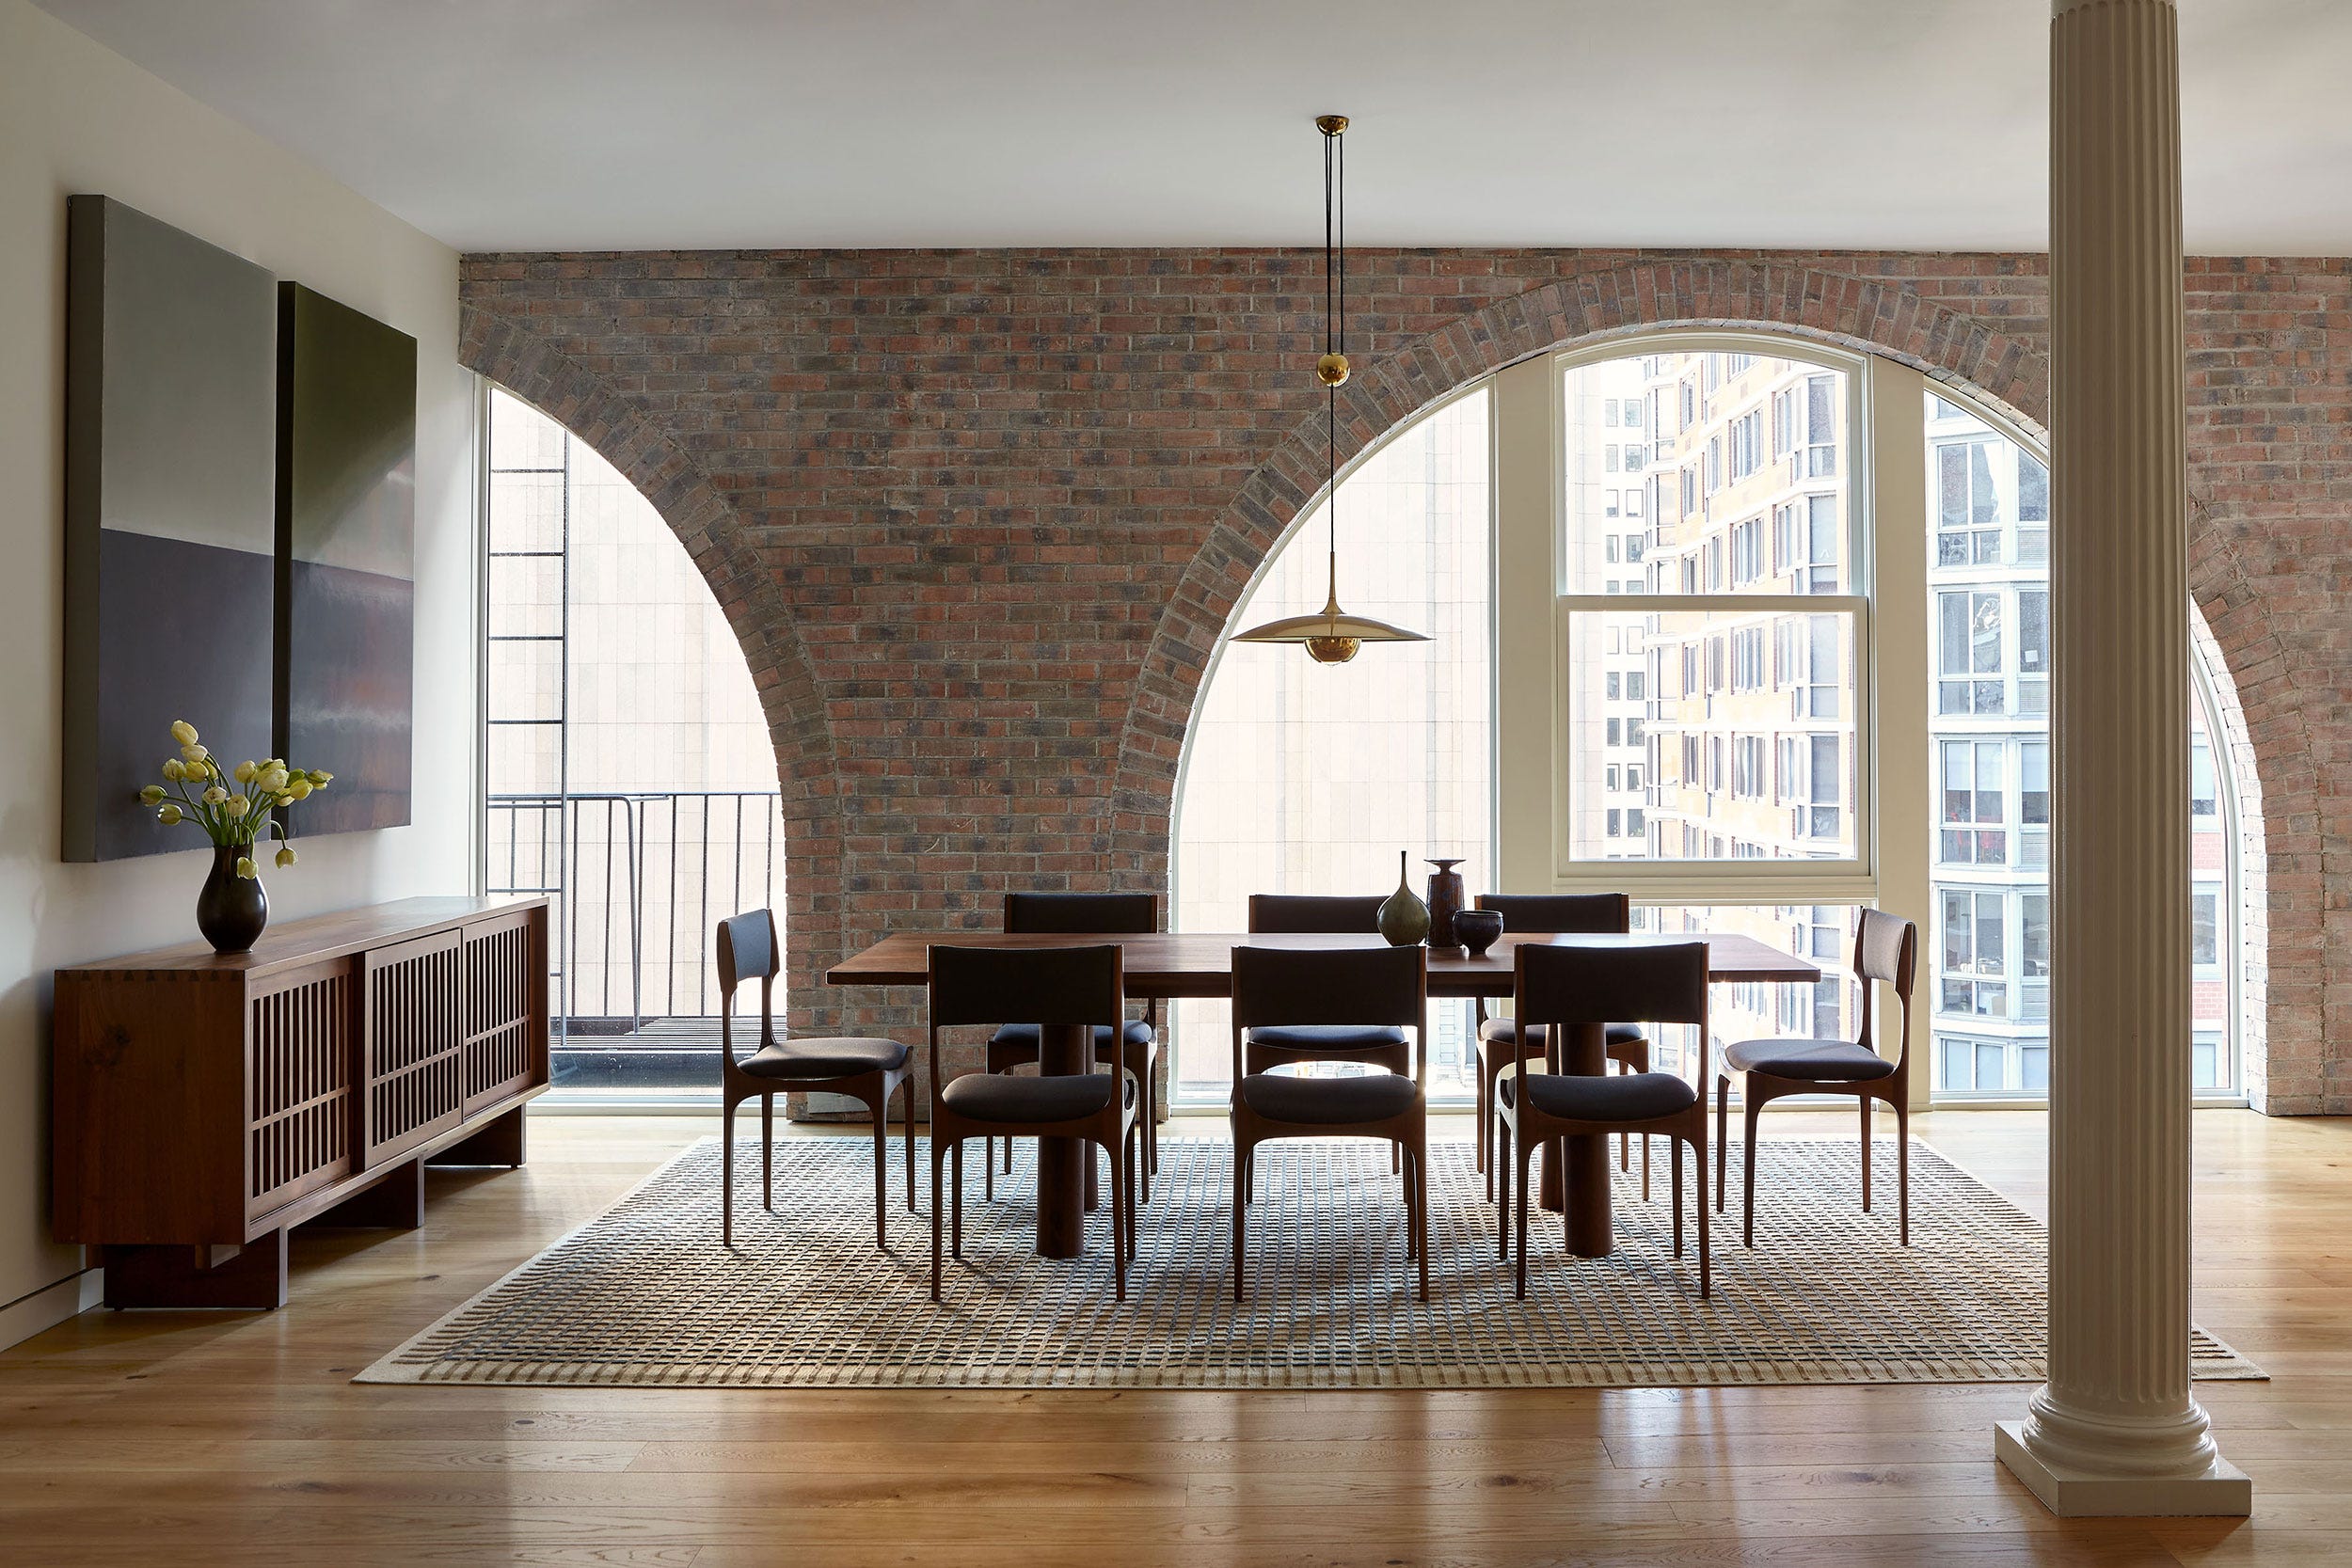 With Classic Brick Arches and a Covetable Wine Collection, This Tribeca Home Is the Ultimate Bachelor Pad